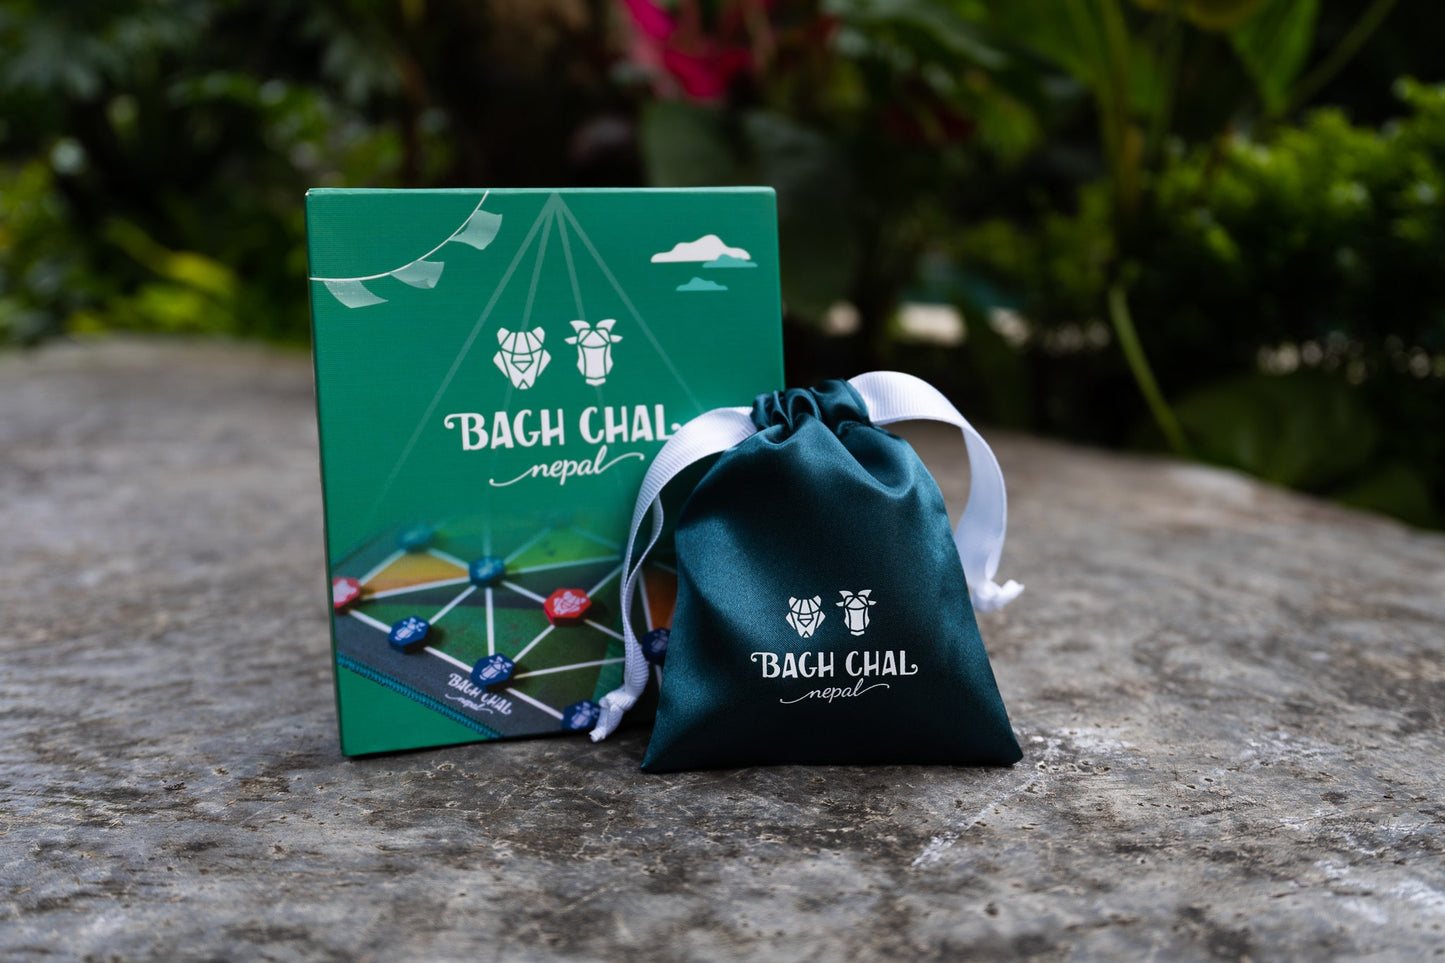 Bagh Chal travel-friendly box version, perfect gift for family, couples or company co-workers. 